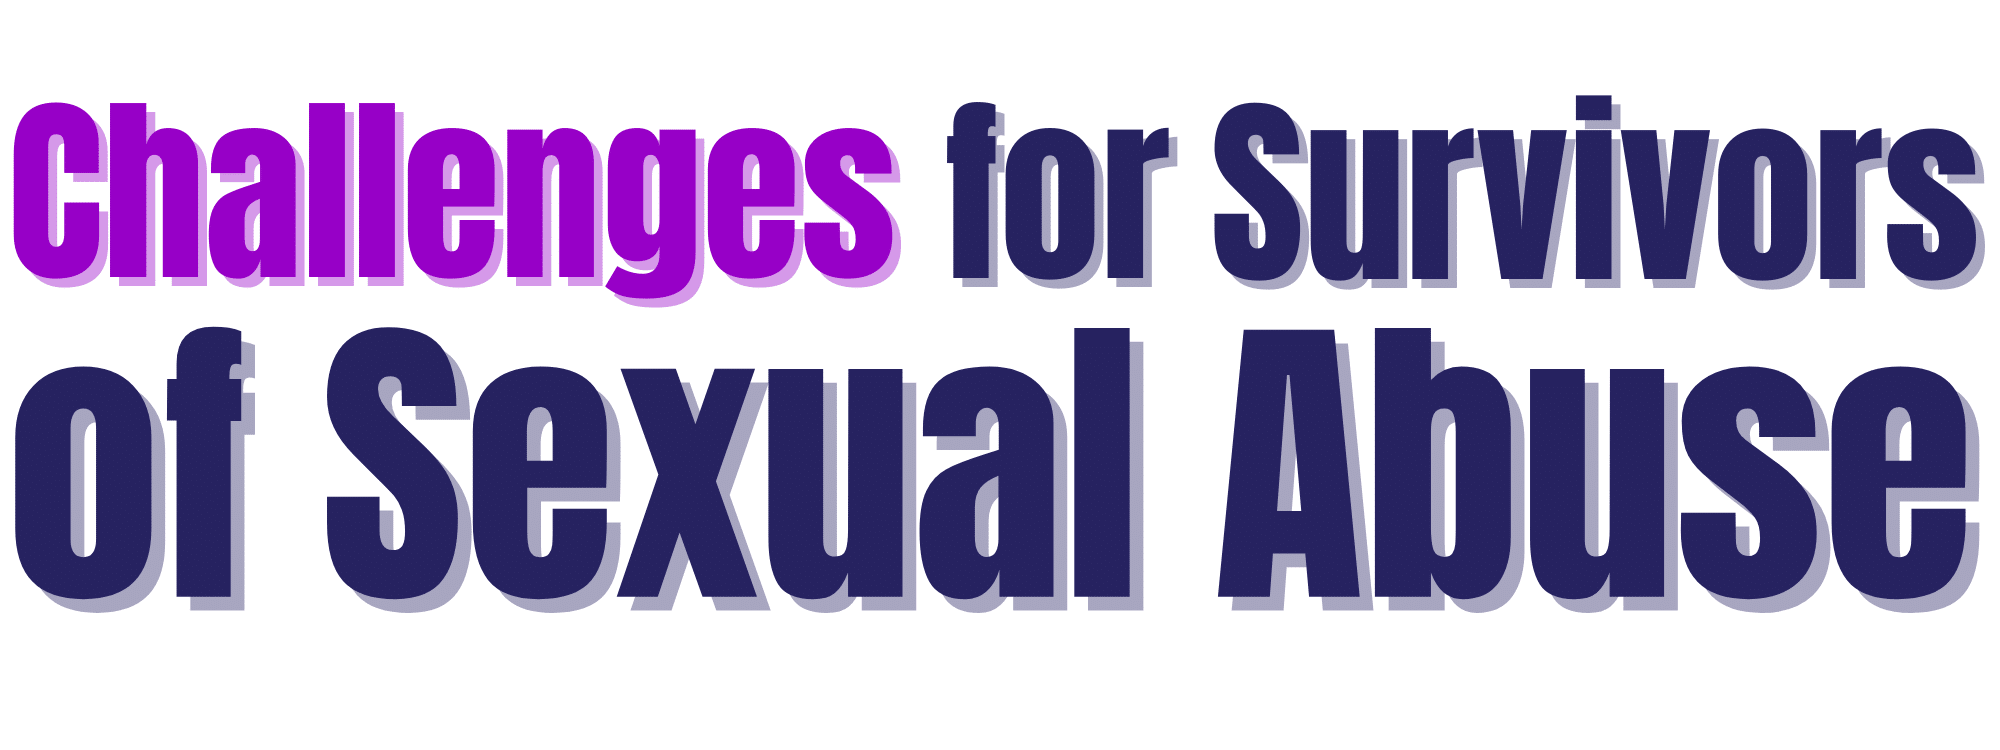 challenges for survivors of sexual abuse